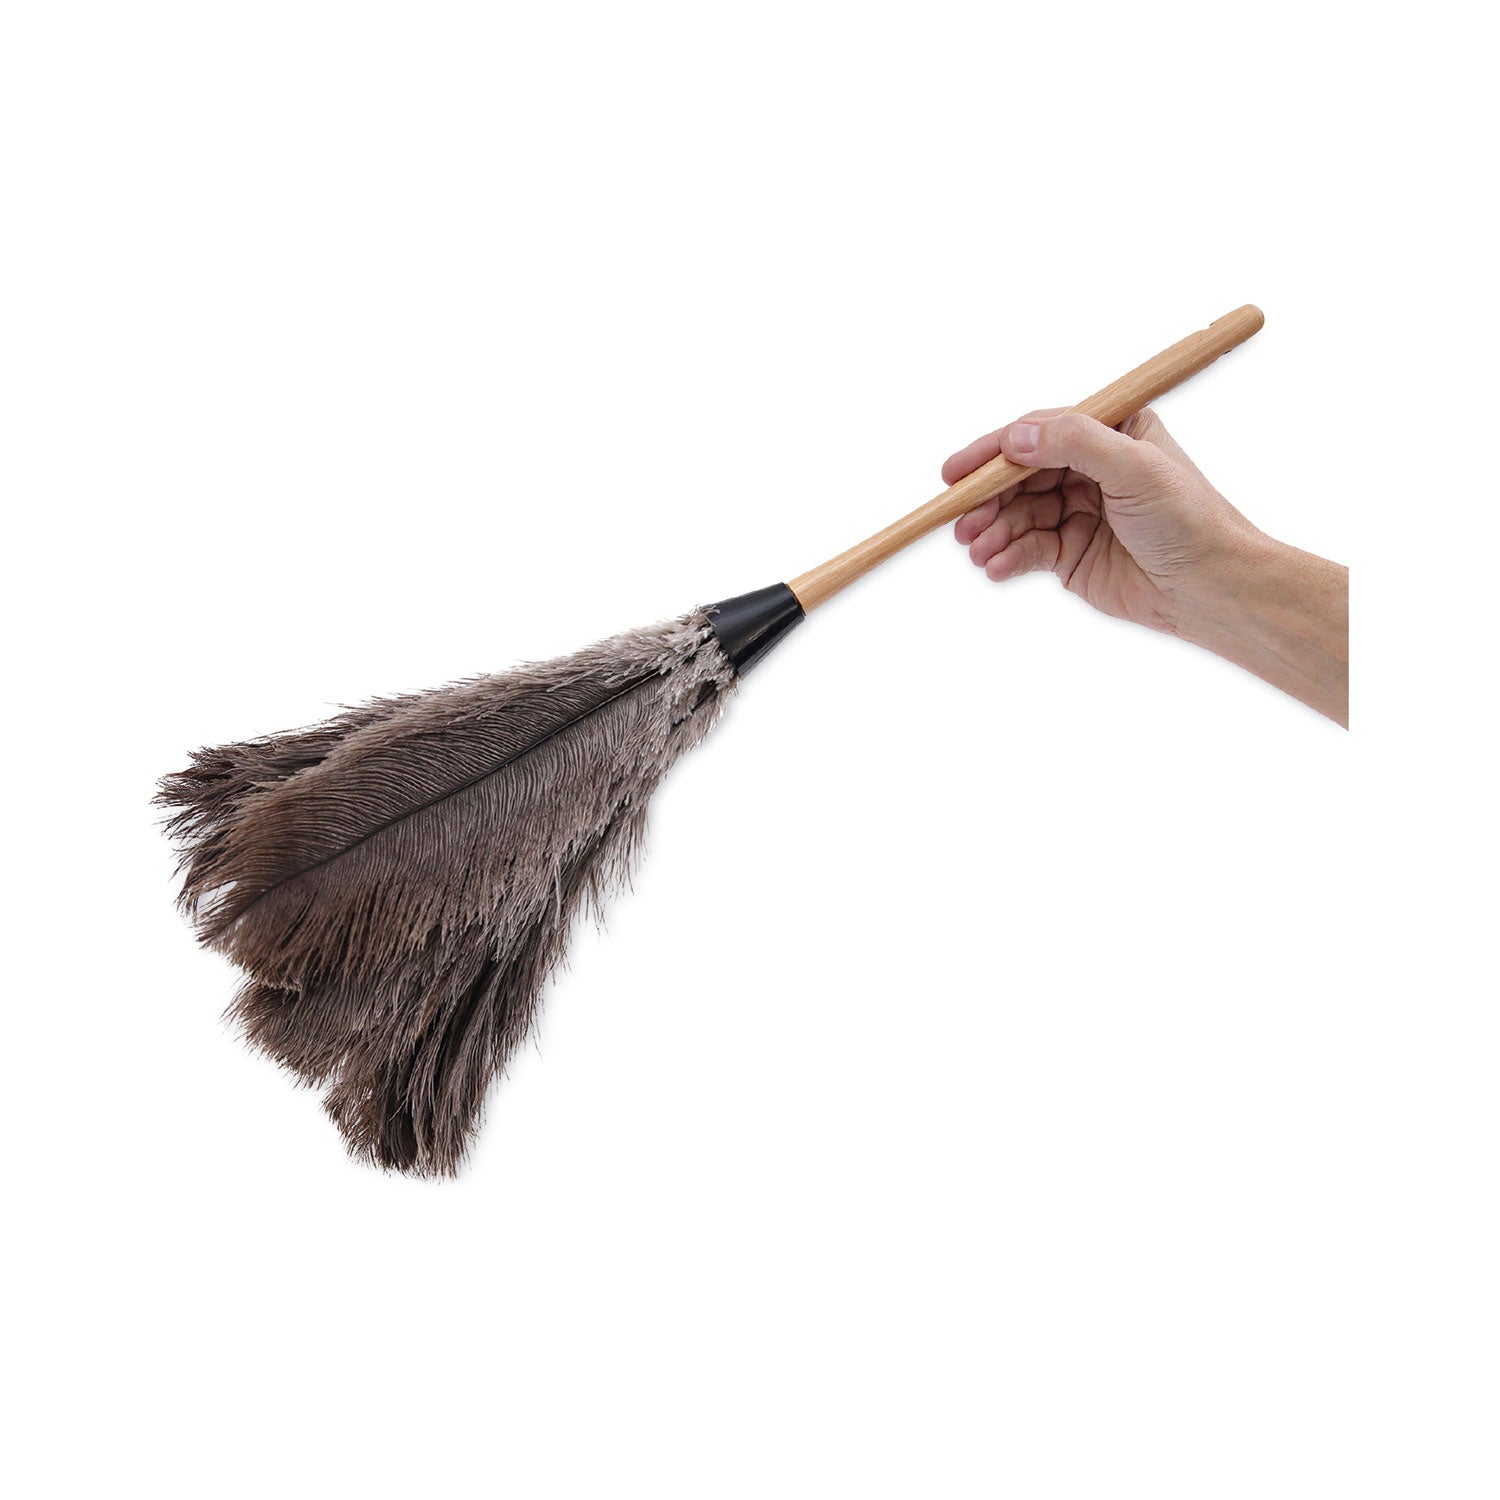 professional-ostrich-feather-duster-wood-handle-20_bwk20gy - 6